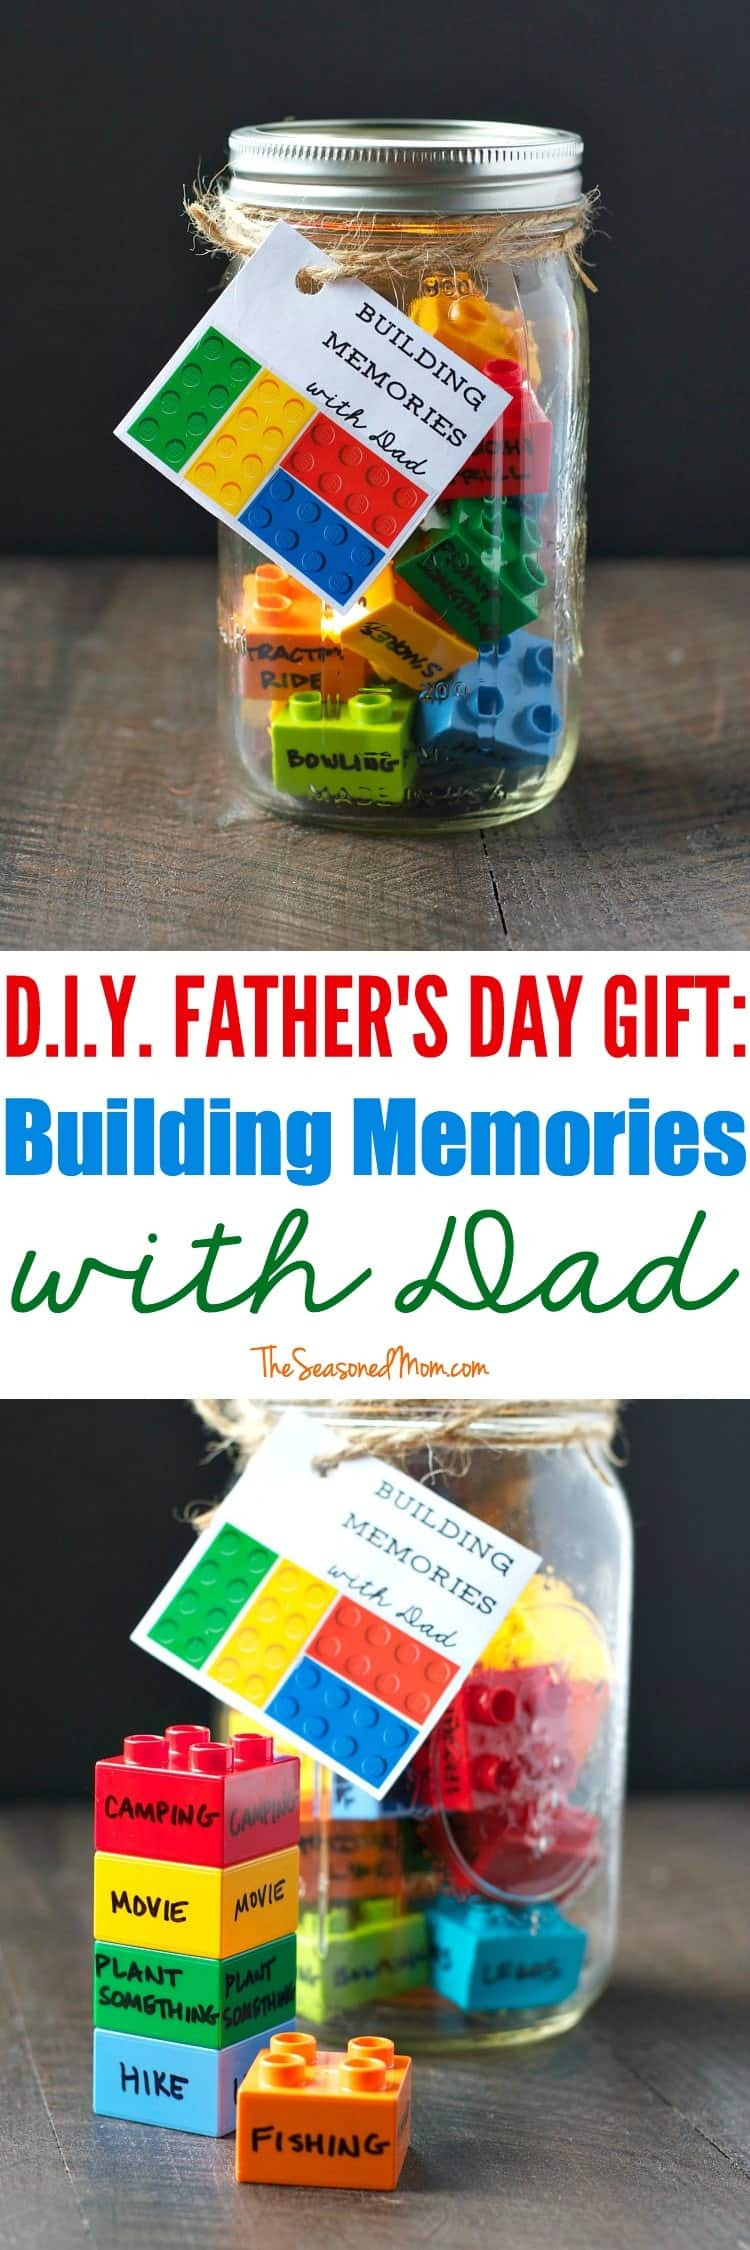 Diy Fathers Day
 DIY Father s Day Gift Building Memories with Dad The